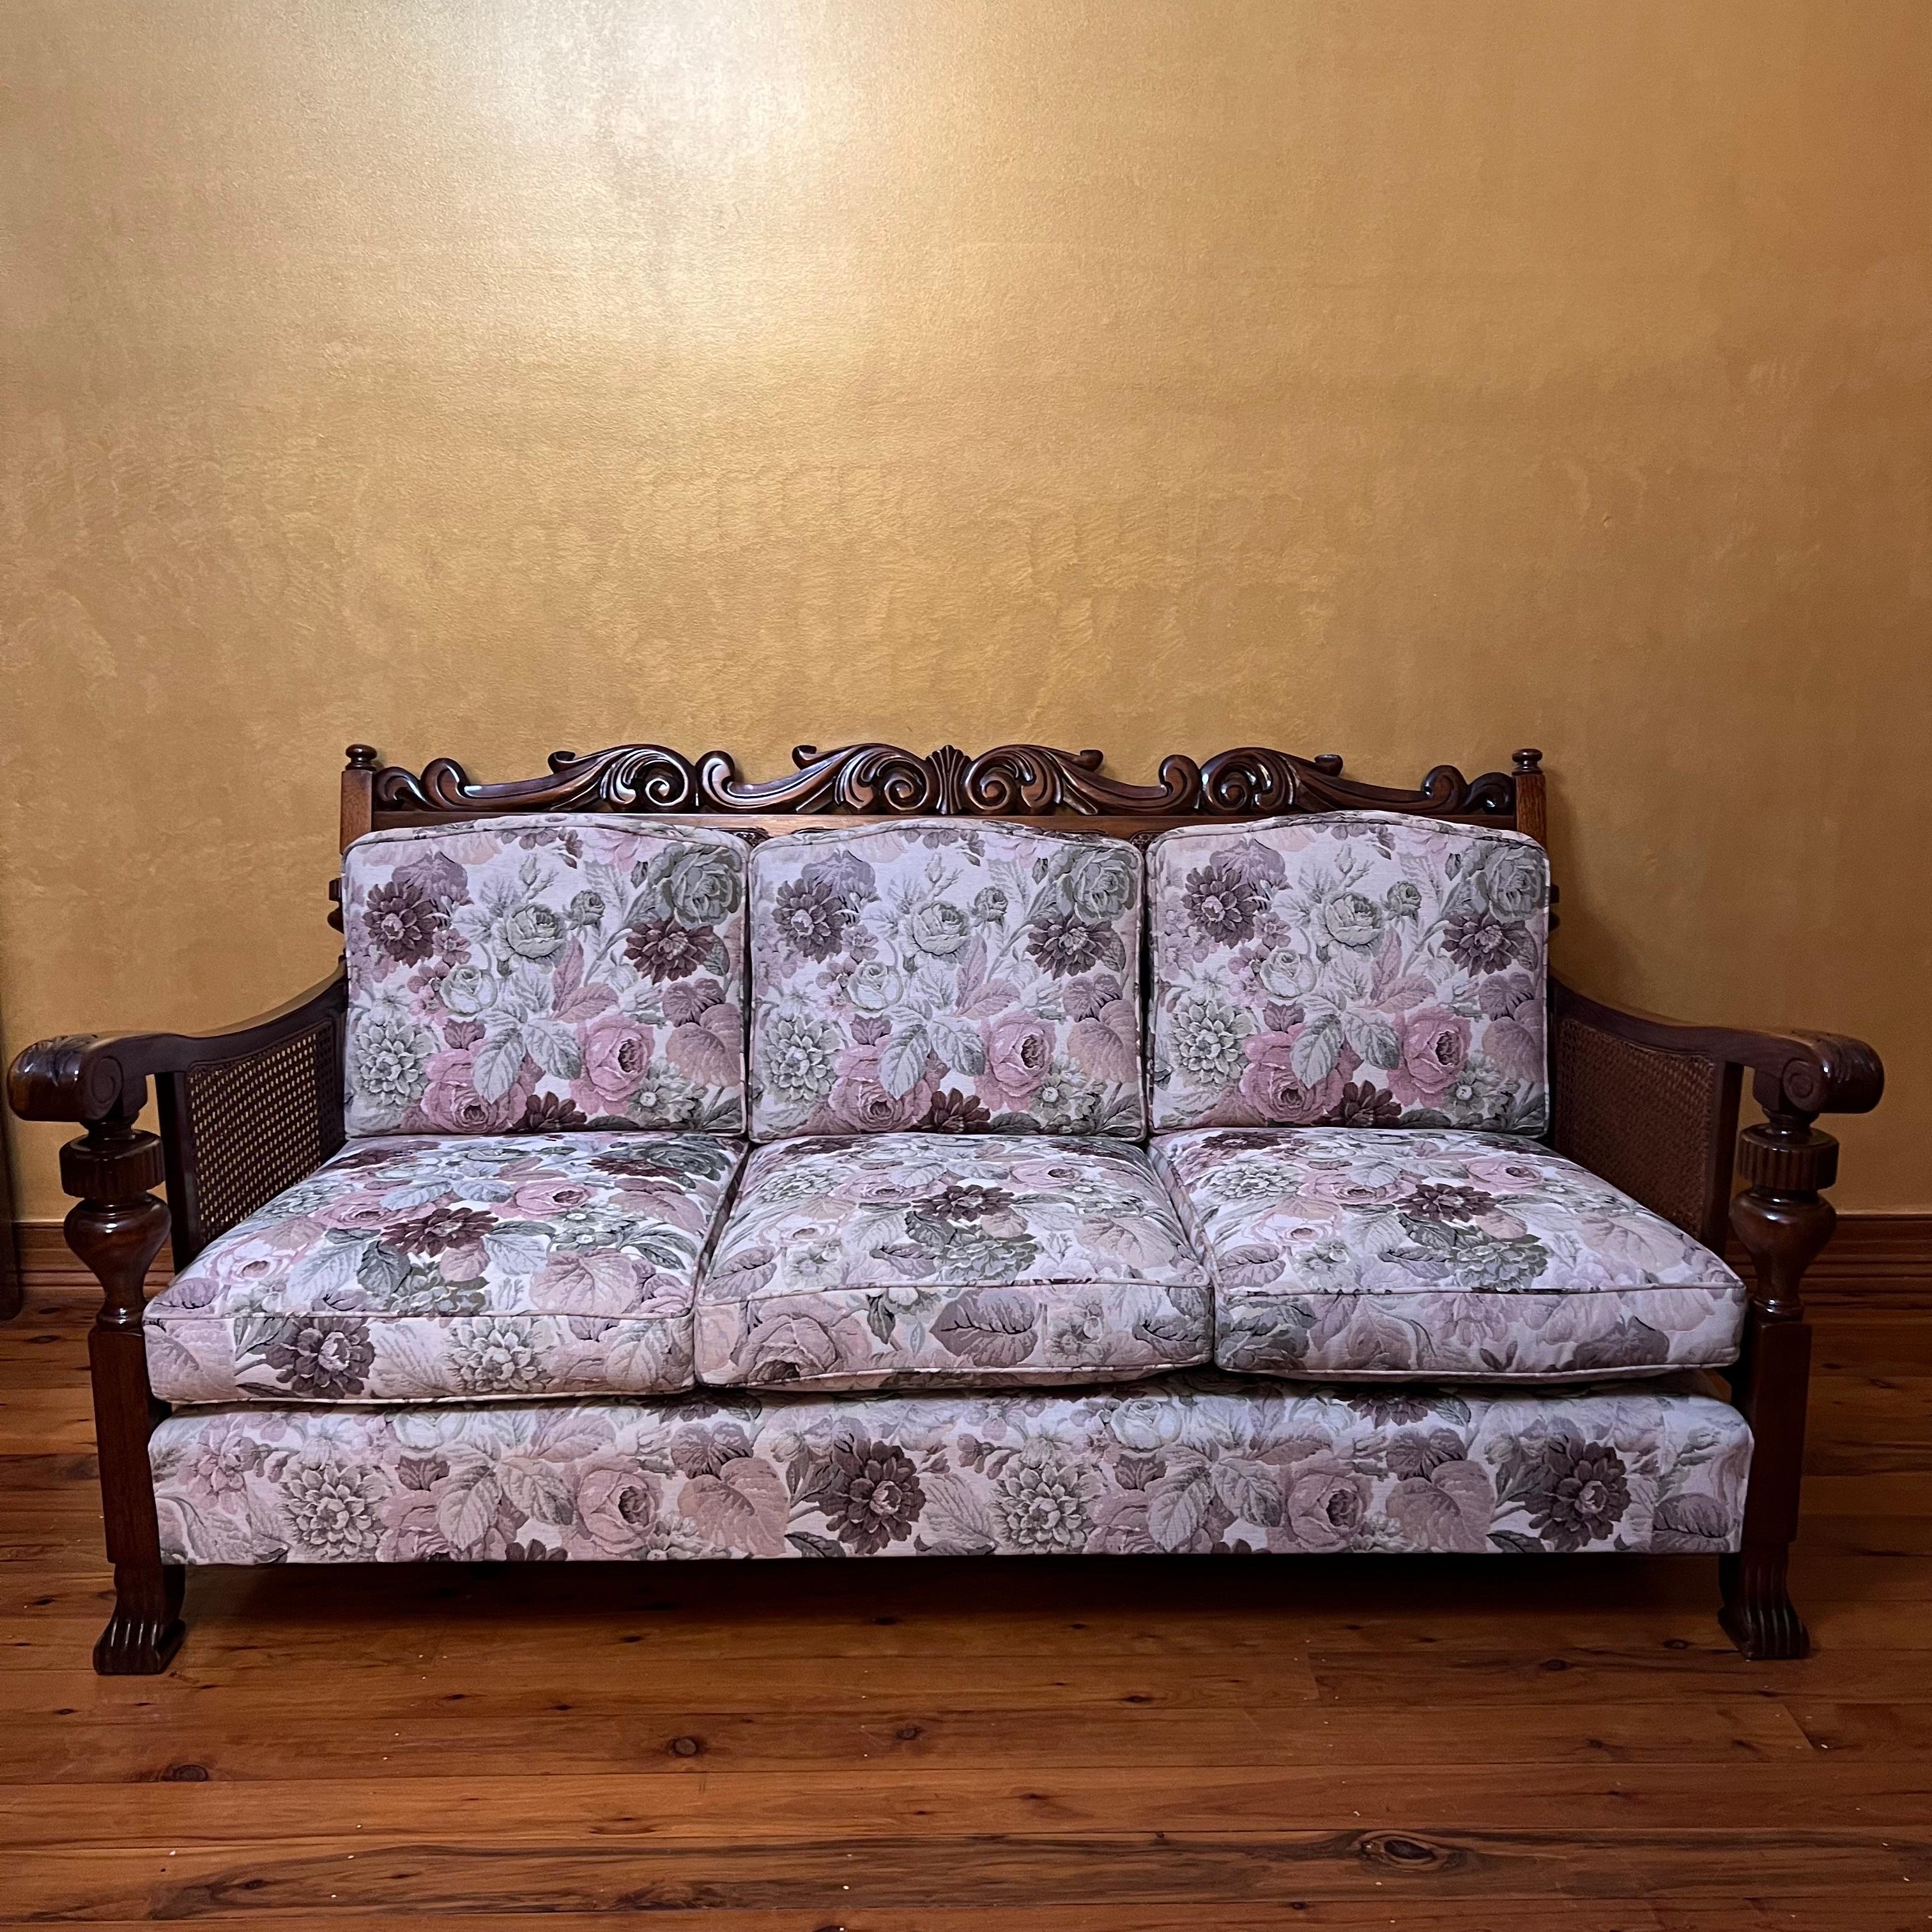 Carved detail on tops, arms and legs, cane detail on sides and back all in good condition, floral print fabric pillows are still original horse hair filling.

circa: 1920s

Measurements

Lounge: 81cm high, 168cm length, 84cm width 

Single